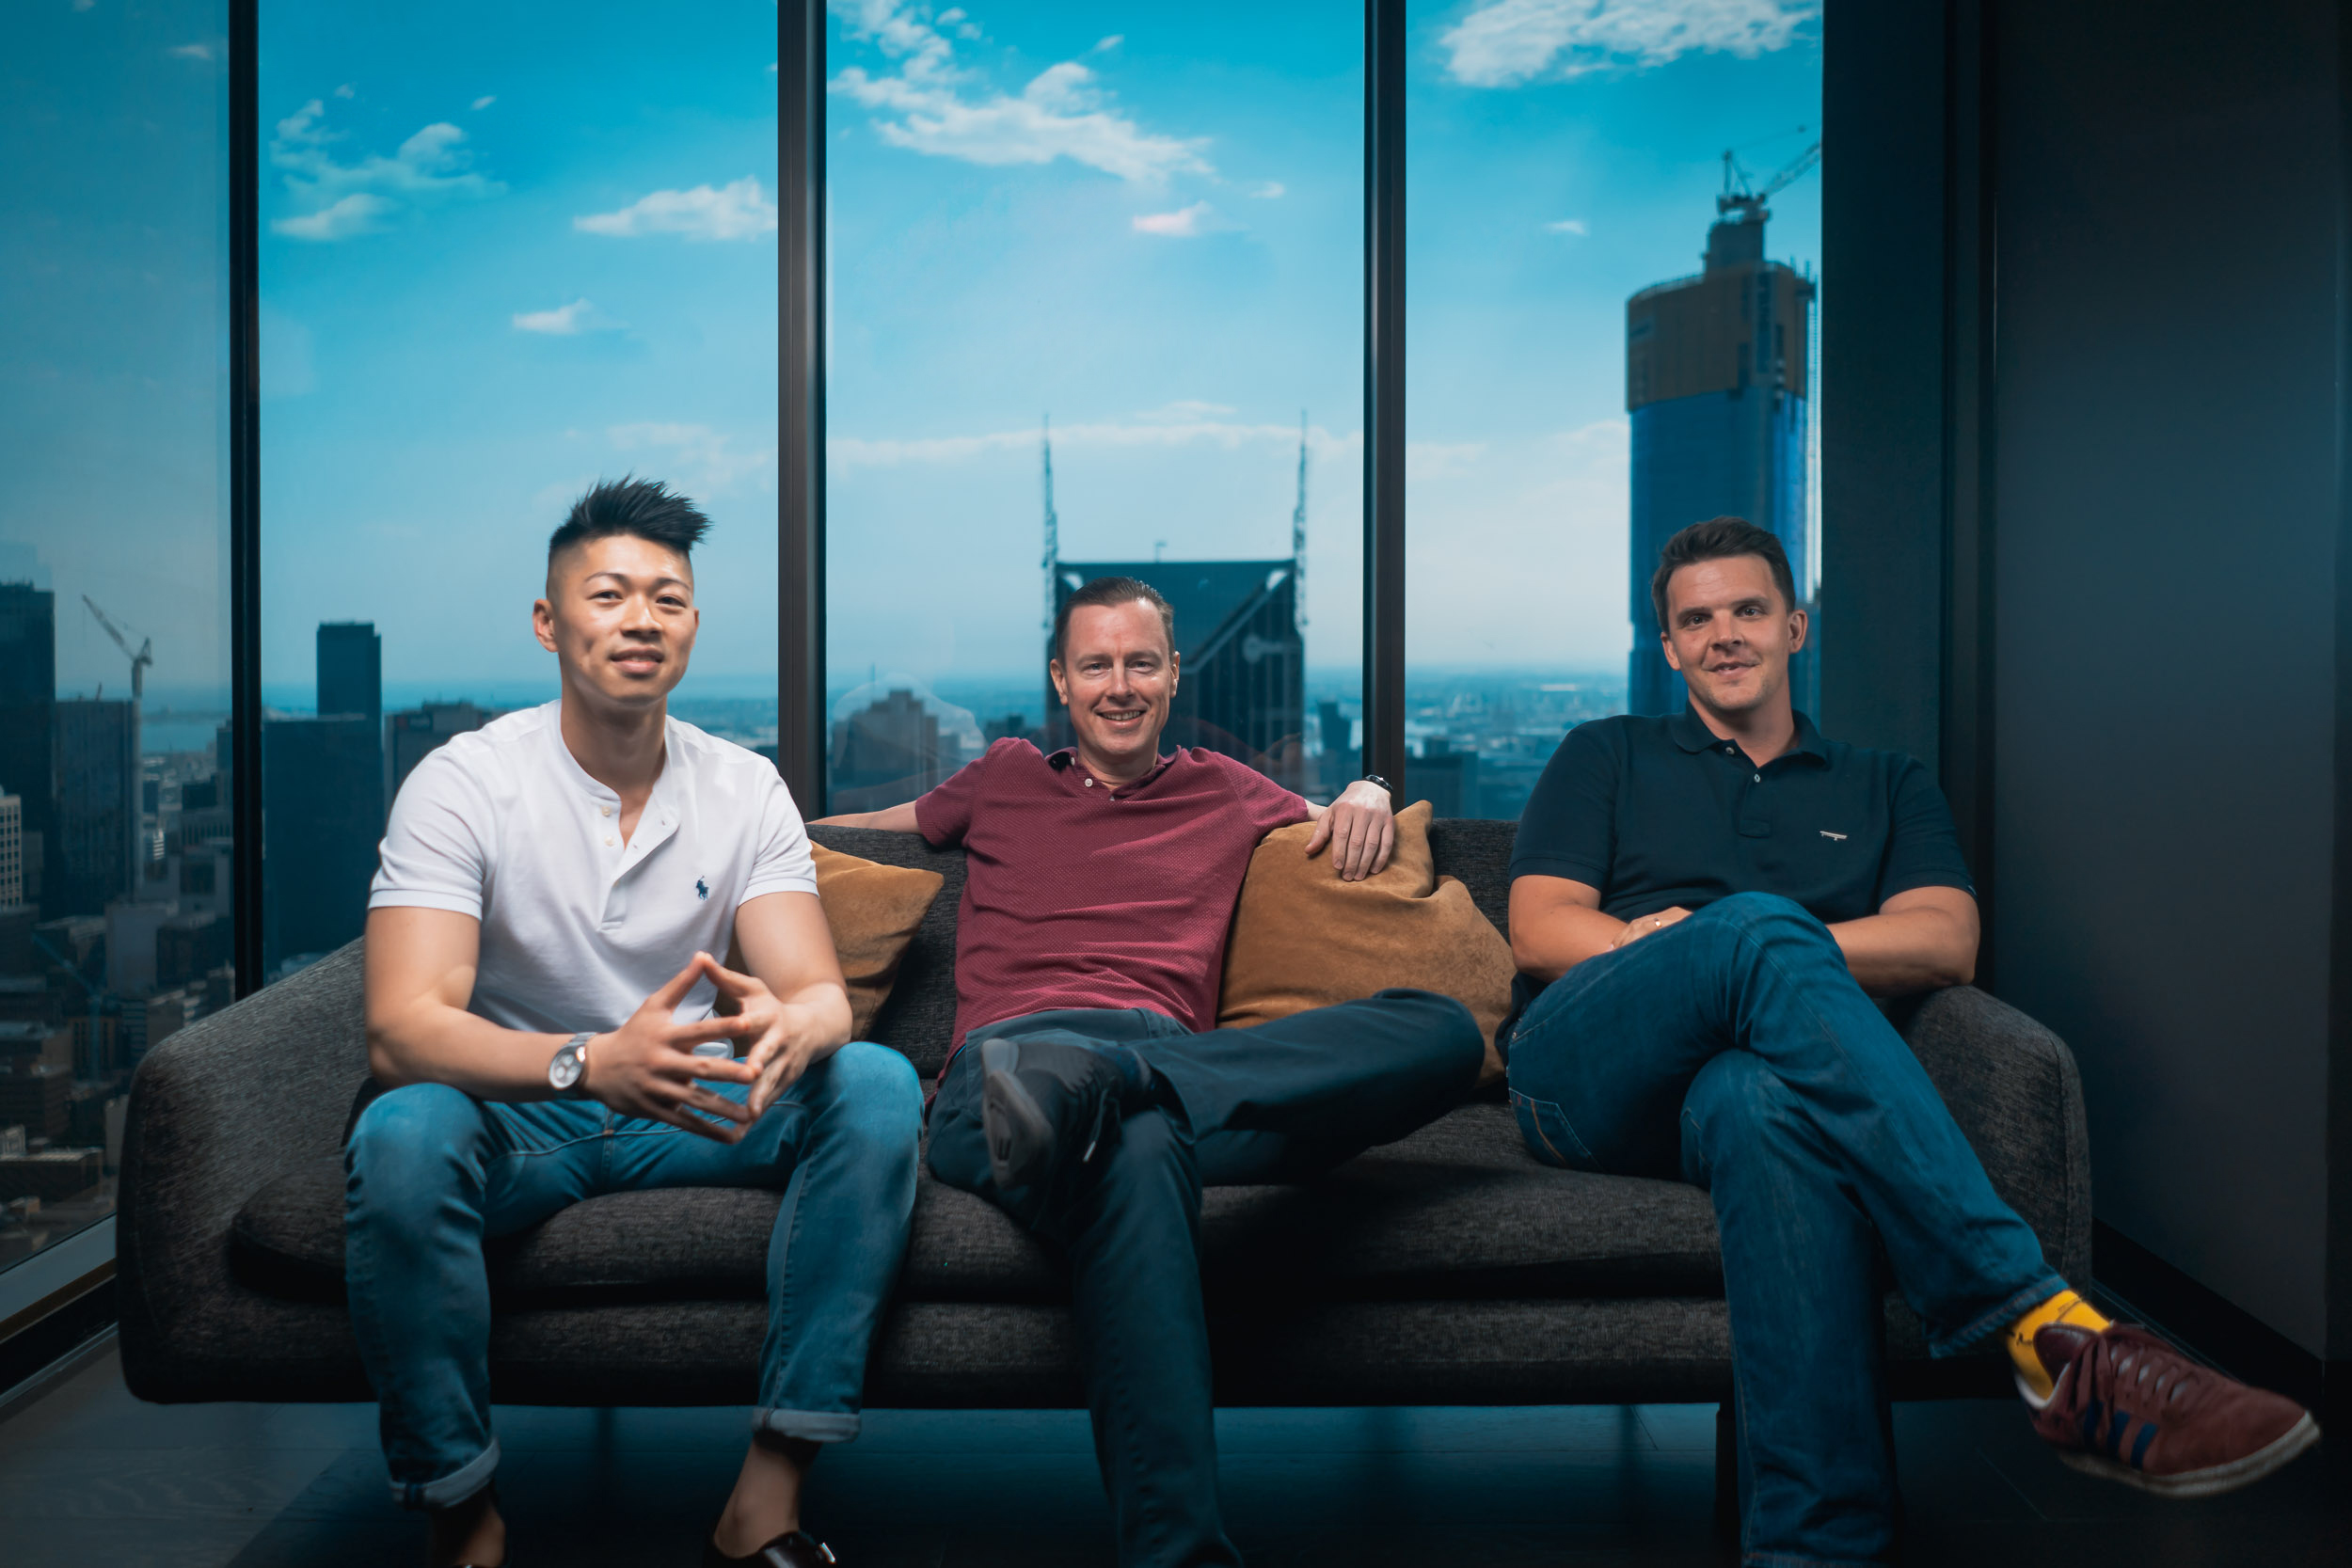 Eric Chin (above, left; photo credit: Lawrence Loque) has consulted to the legal industry for nearly a decade, first at renowned consulting firm Beaton, and now with his new firm, Alpha Creates.